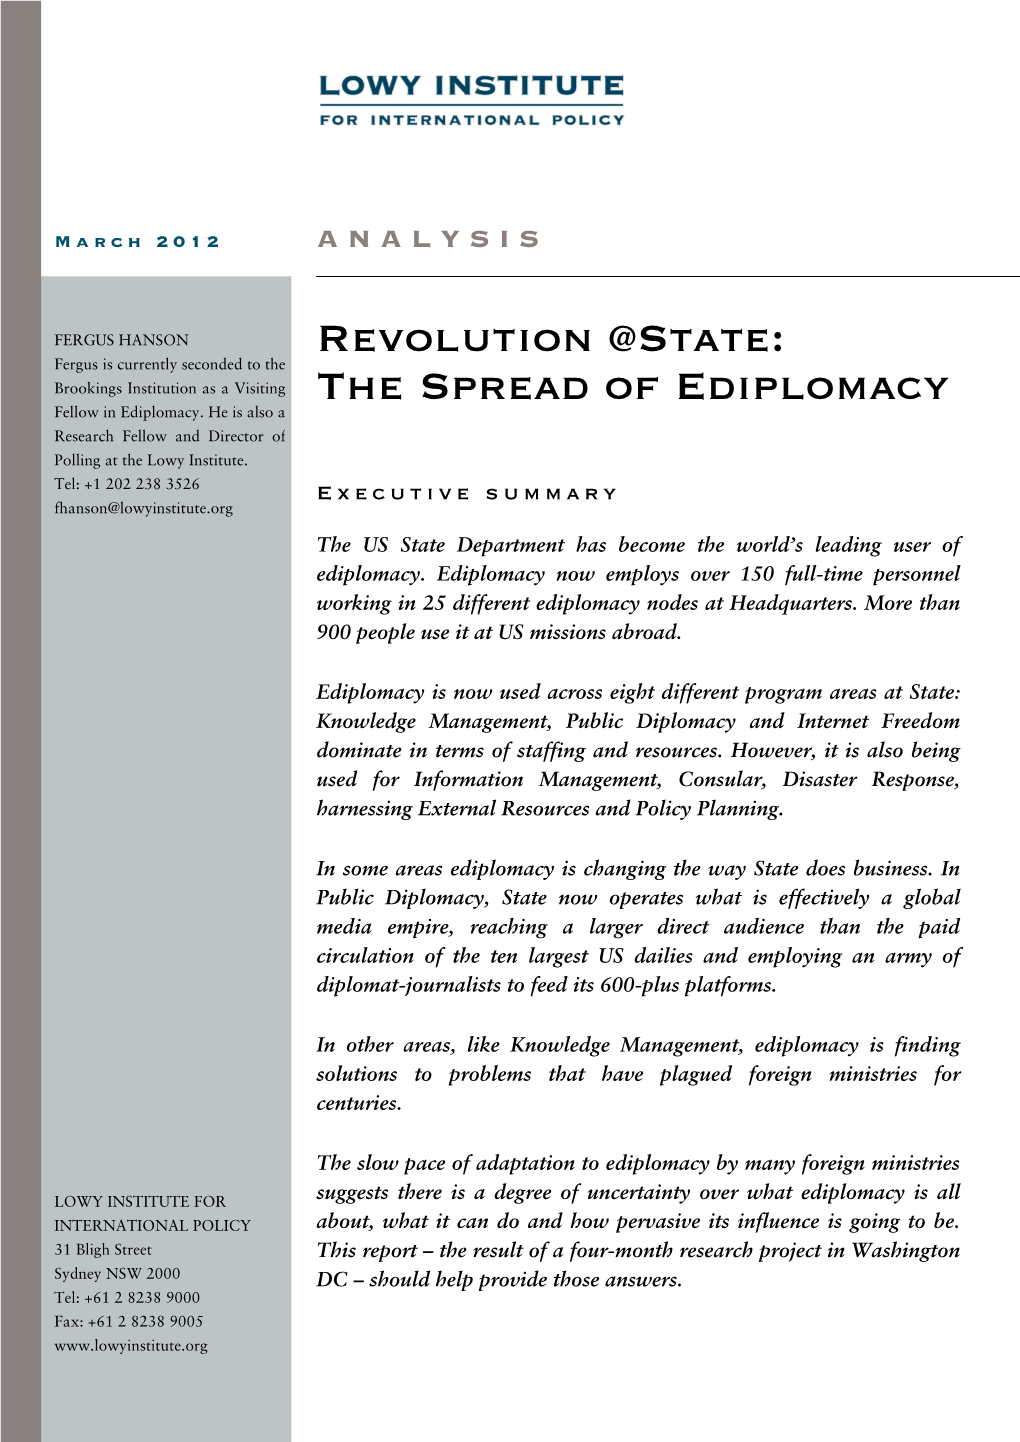 Revolution @State: the Spread of Ediplomacy